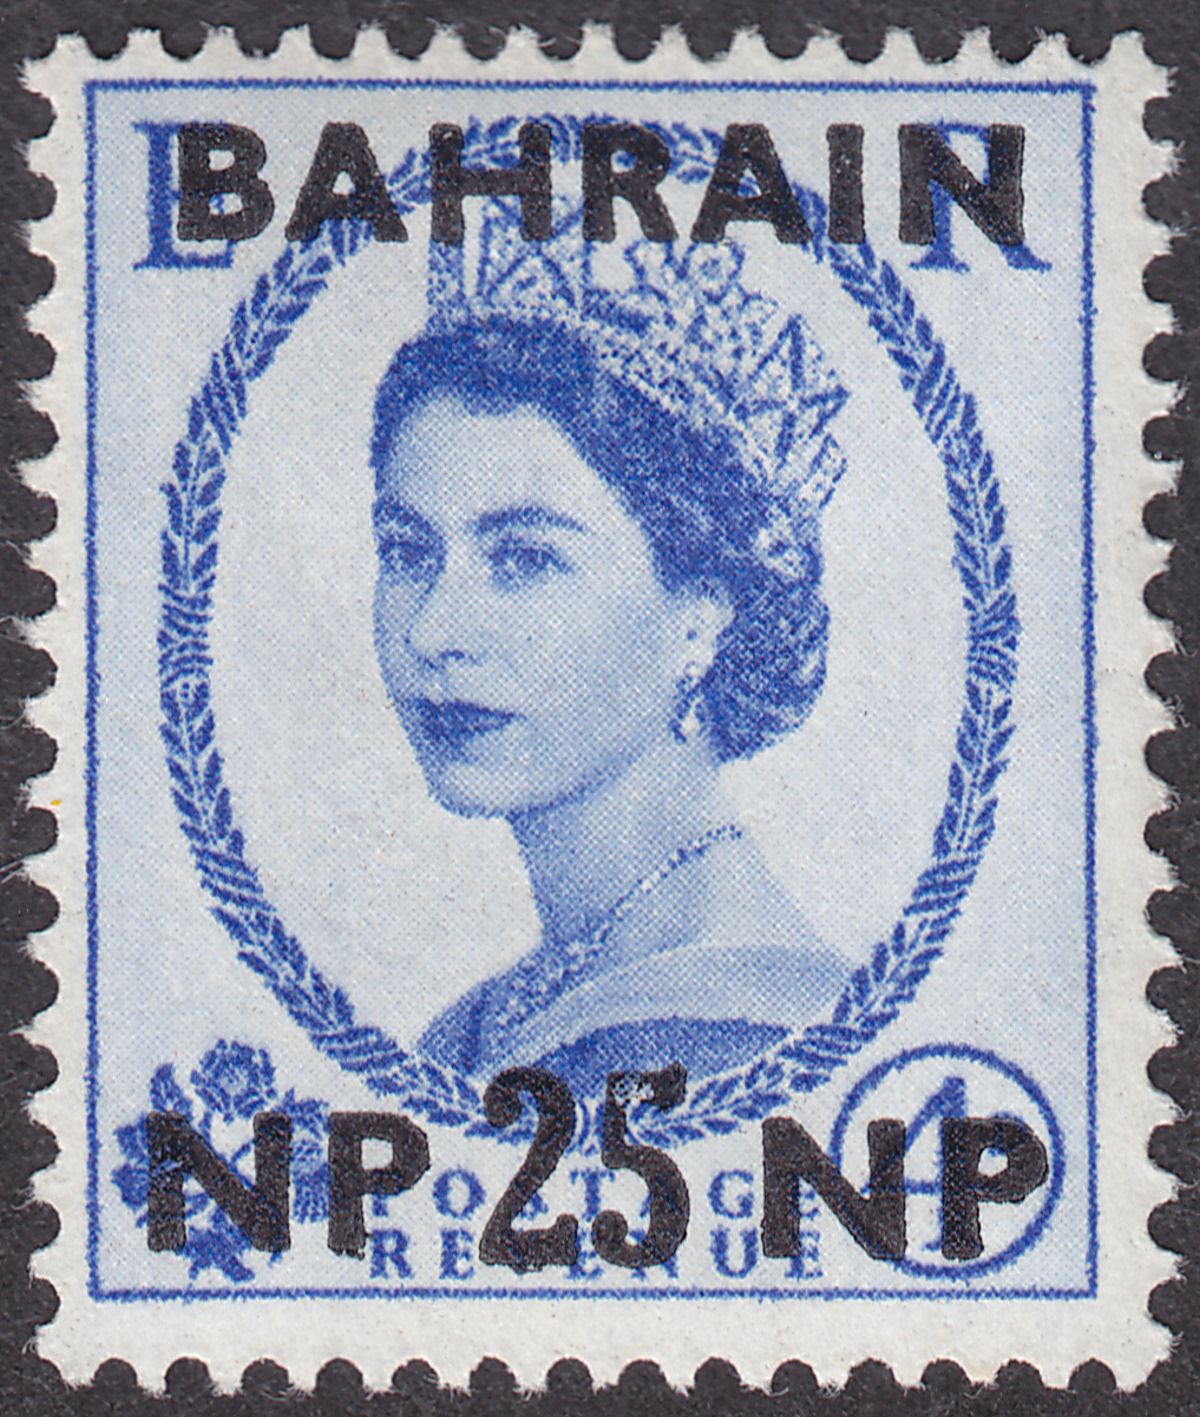 Bahrain 1957 QEII 25np Surcharge on 4d Broken 5 in 25np Variety Mint